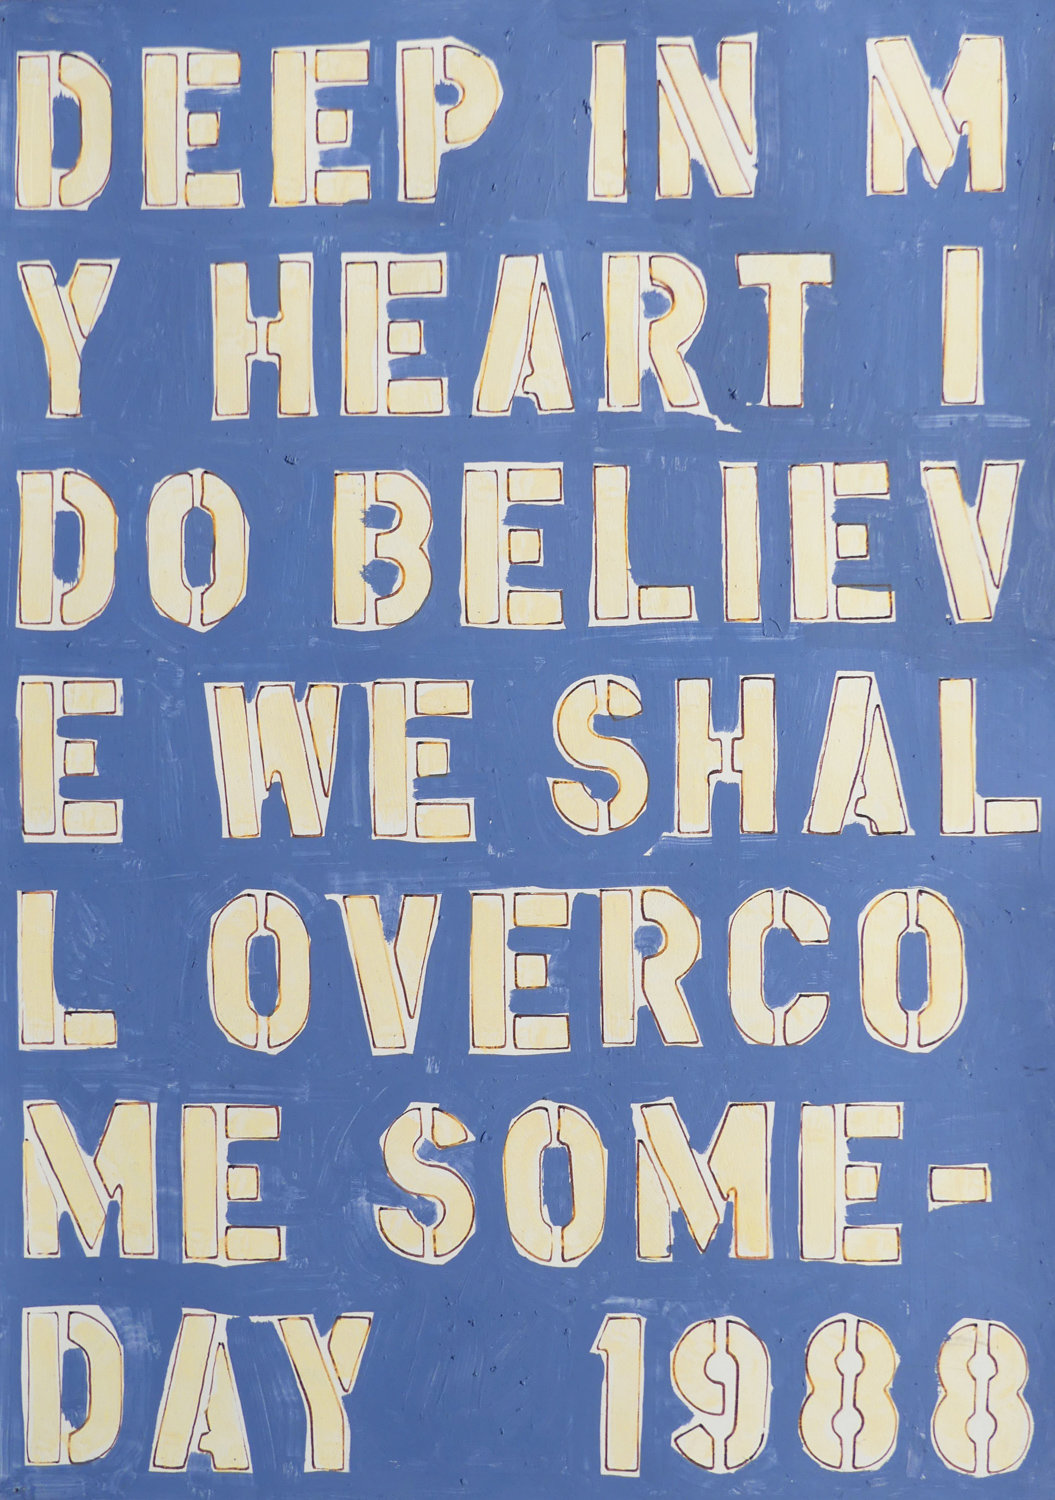 In 1988, Tim Greathouse painted a lyric from the gospel song ‘We Shall Overcome.’